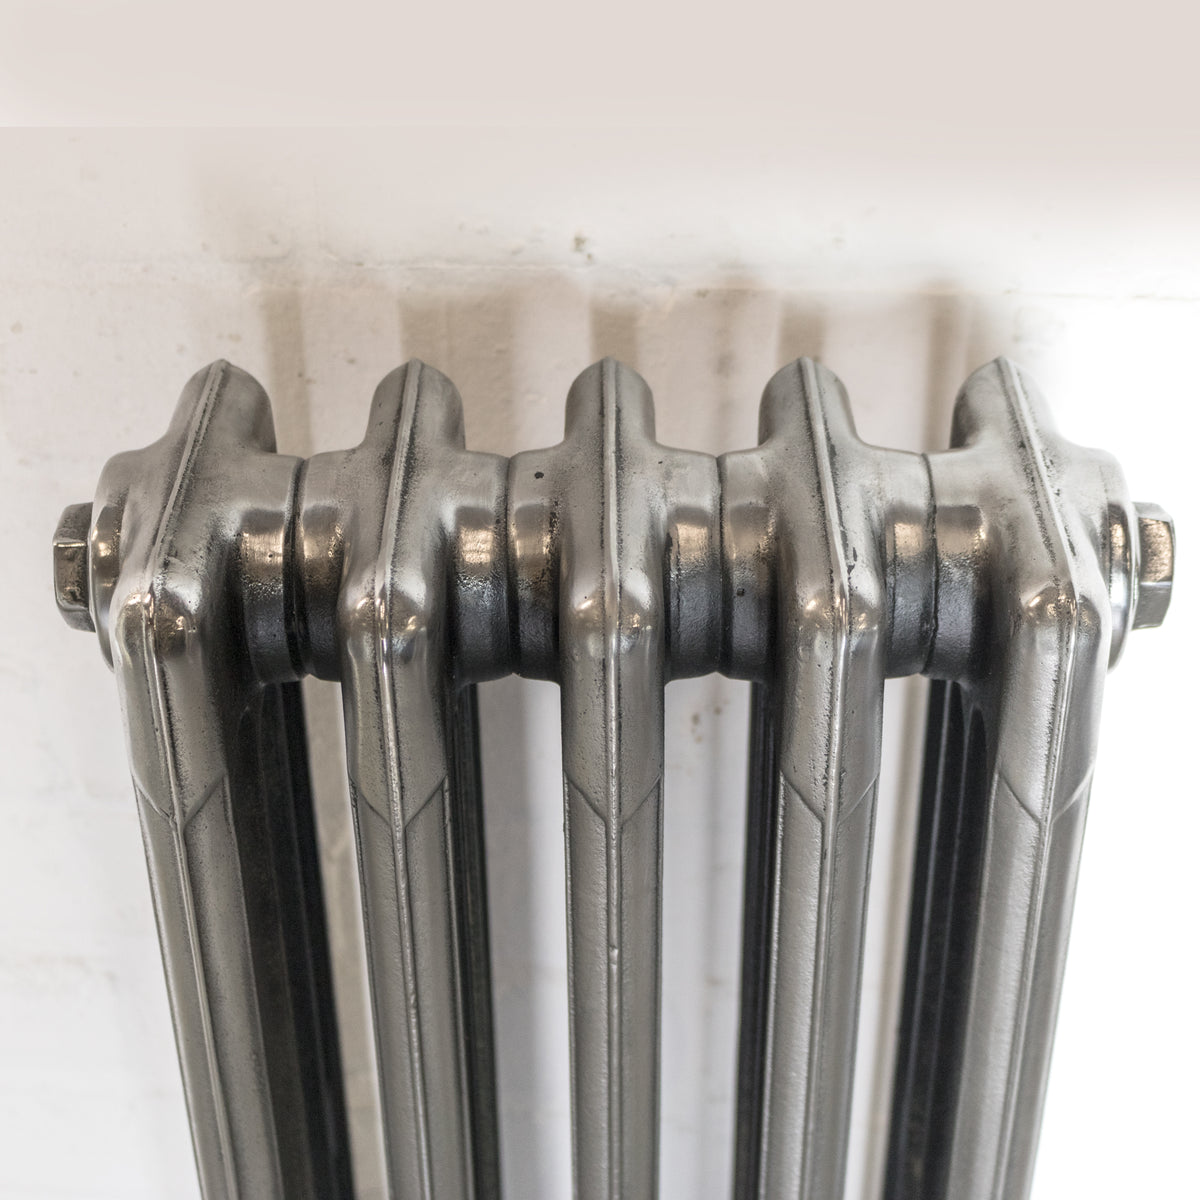 Fully Restored Ideal Cast Iron Radiator 4 Column 5 Section (92cm tall) | The Architectural Forum